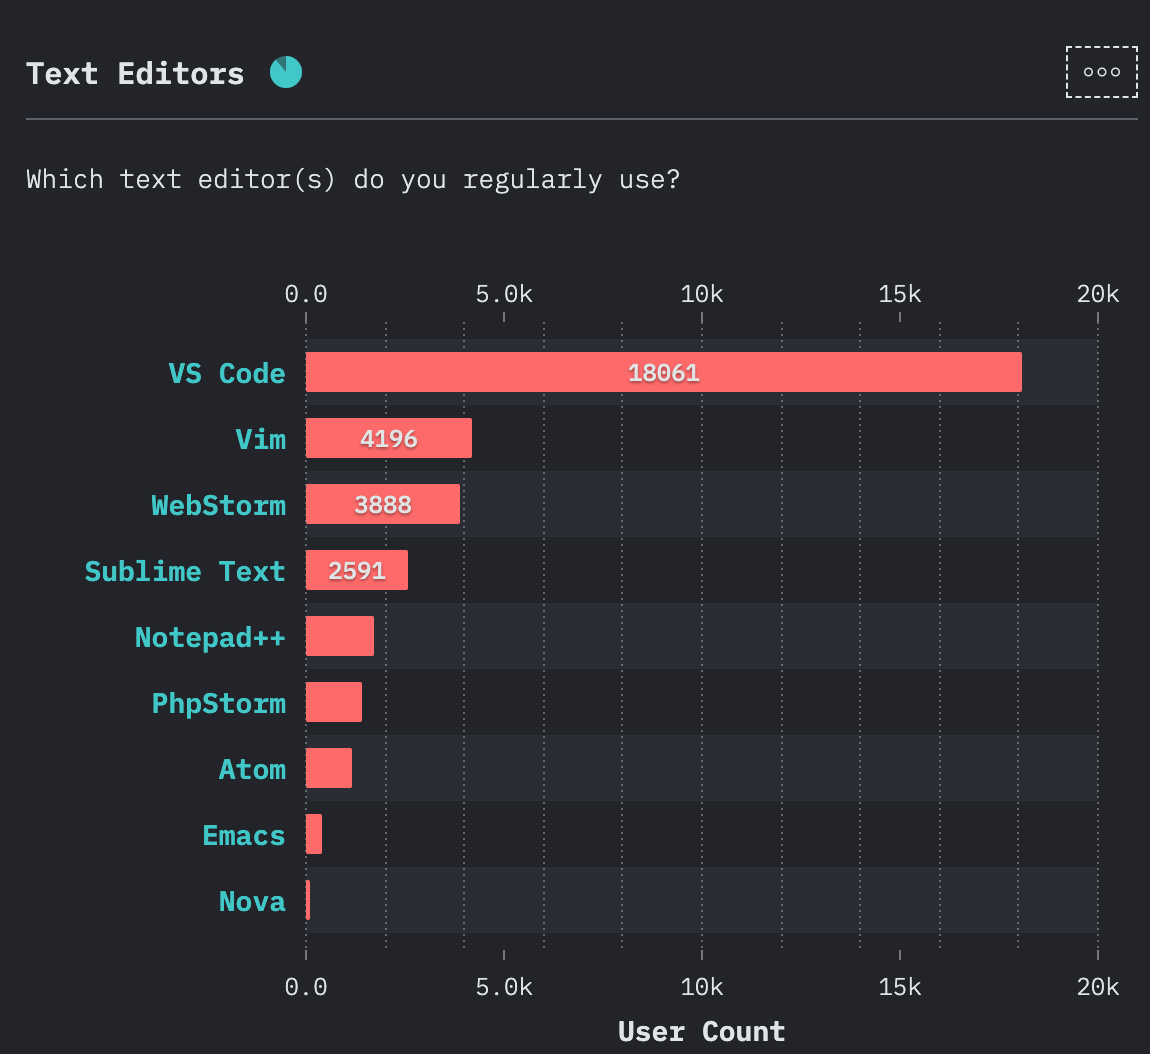 Text Editor Usage in 2020